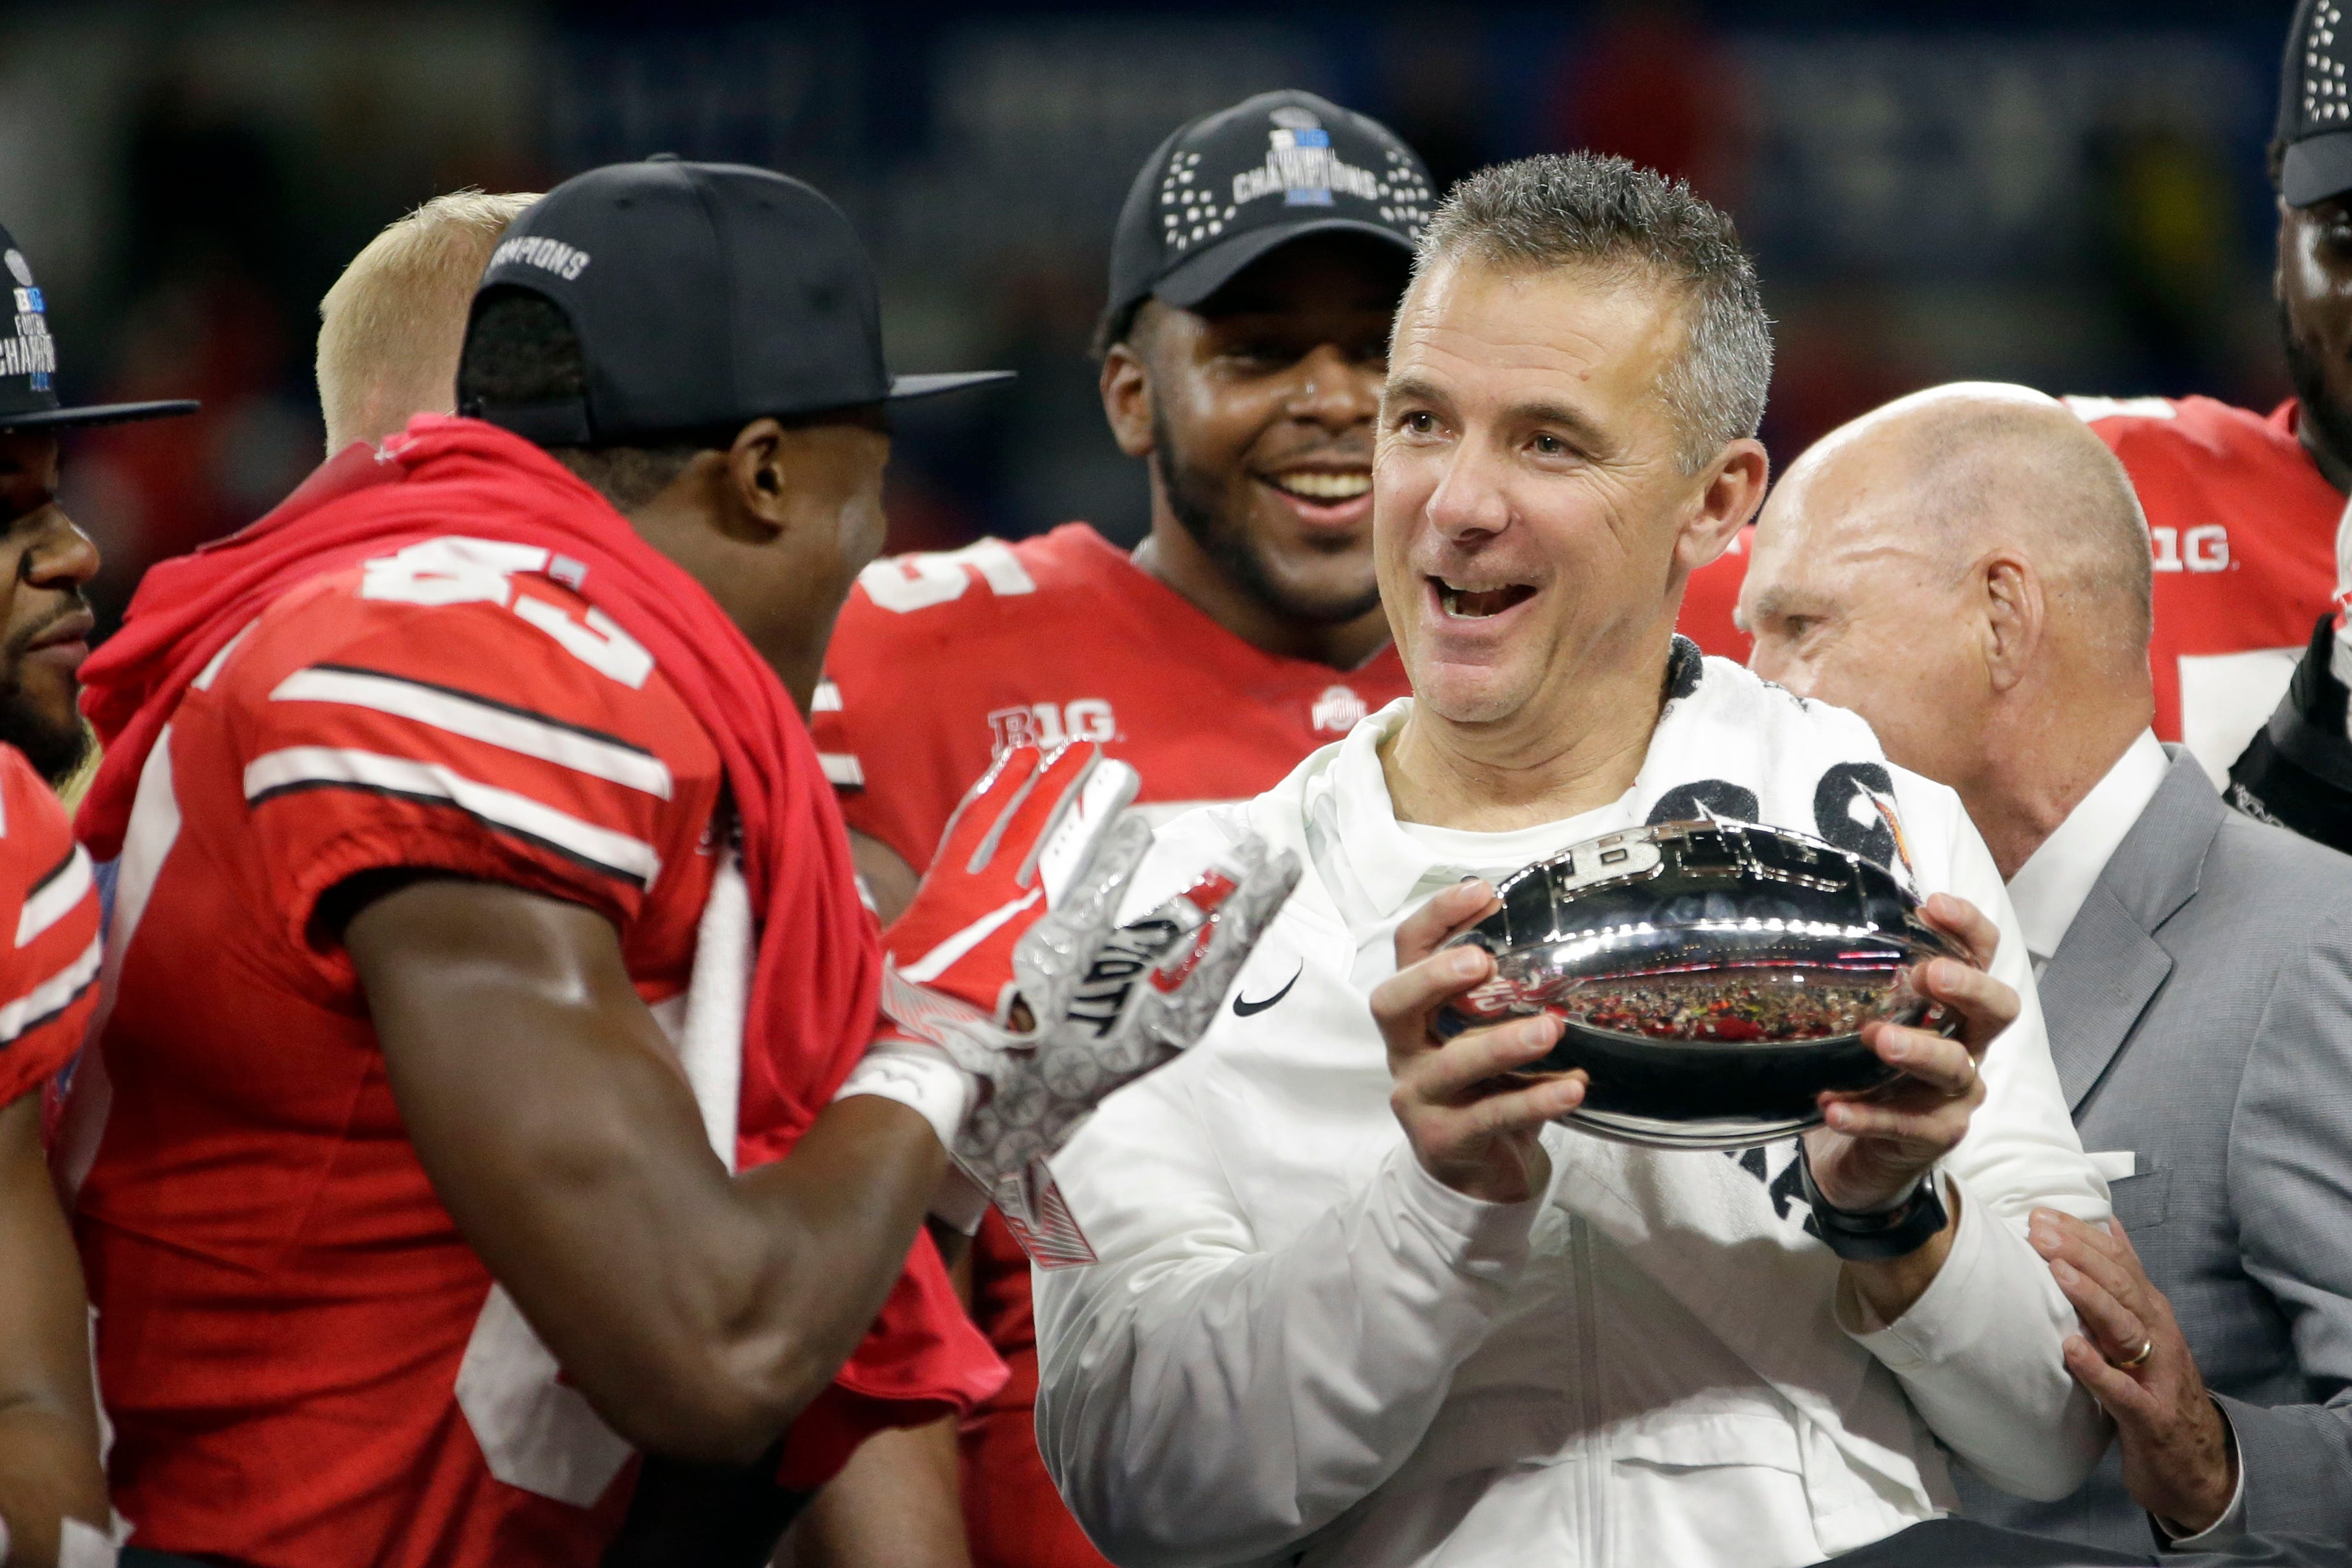 Ohio State head coach Urban Meyer celebrates winning the Big Ten championship. He is retiring after the Rose Bowl.